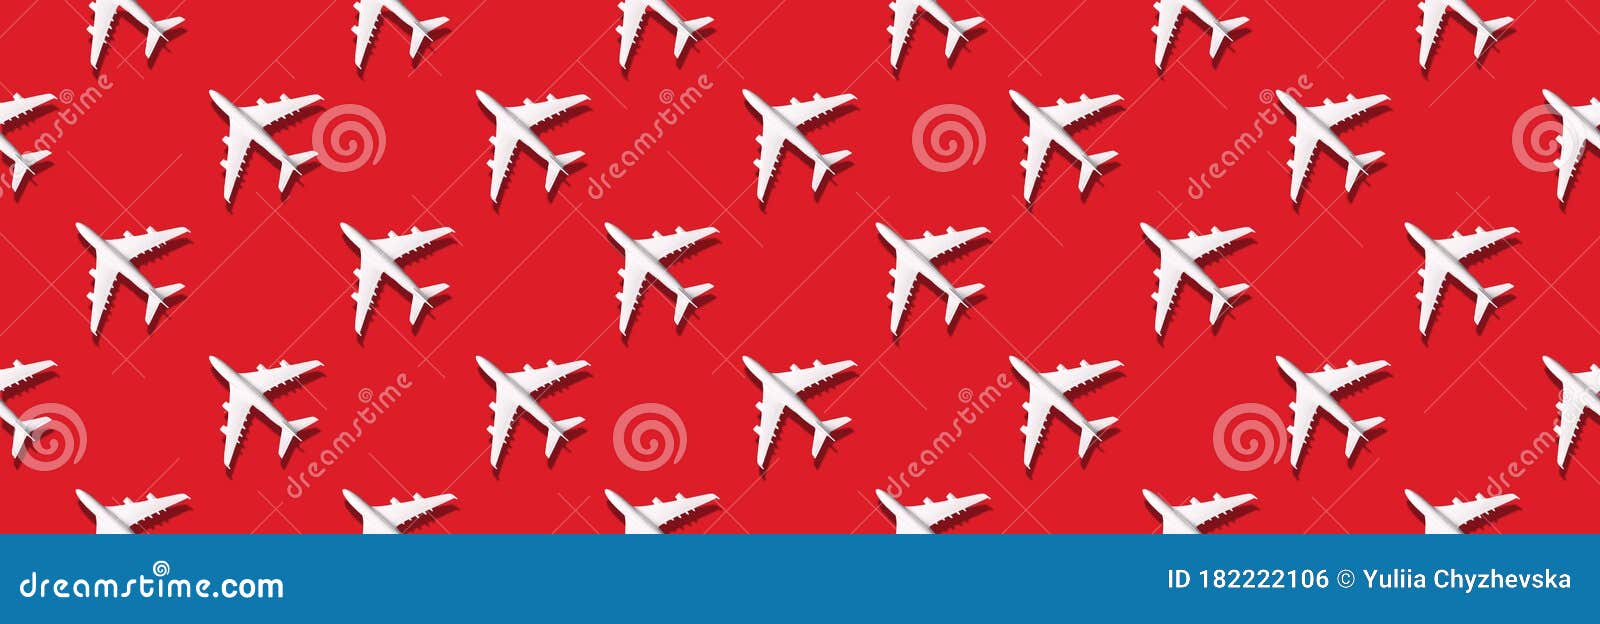 Creative Banner of White Planes on Red Background. Travel, Vacation  Concept. Travel, Vacation Ban Stock Photo - Image of plane, pattern:  182222106